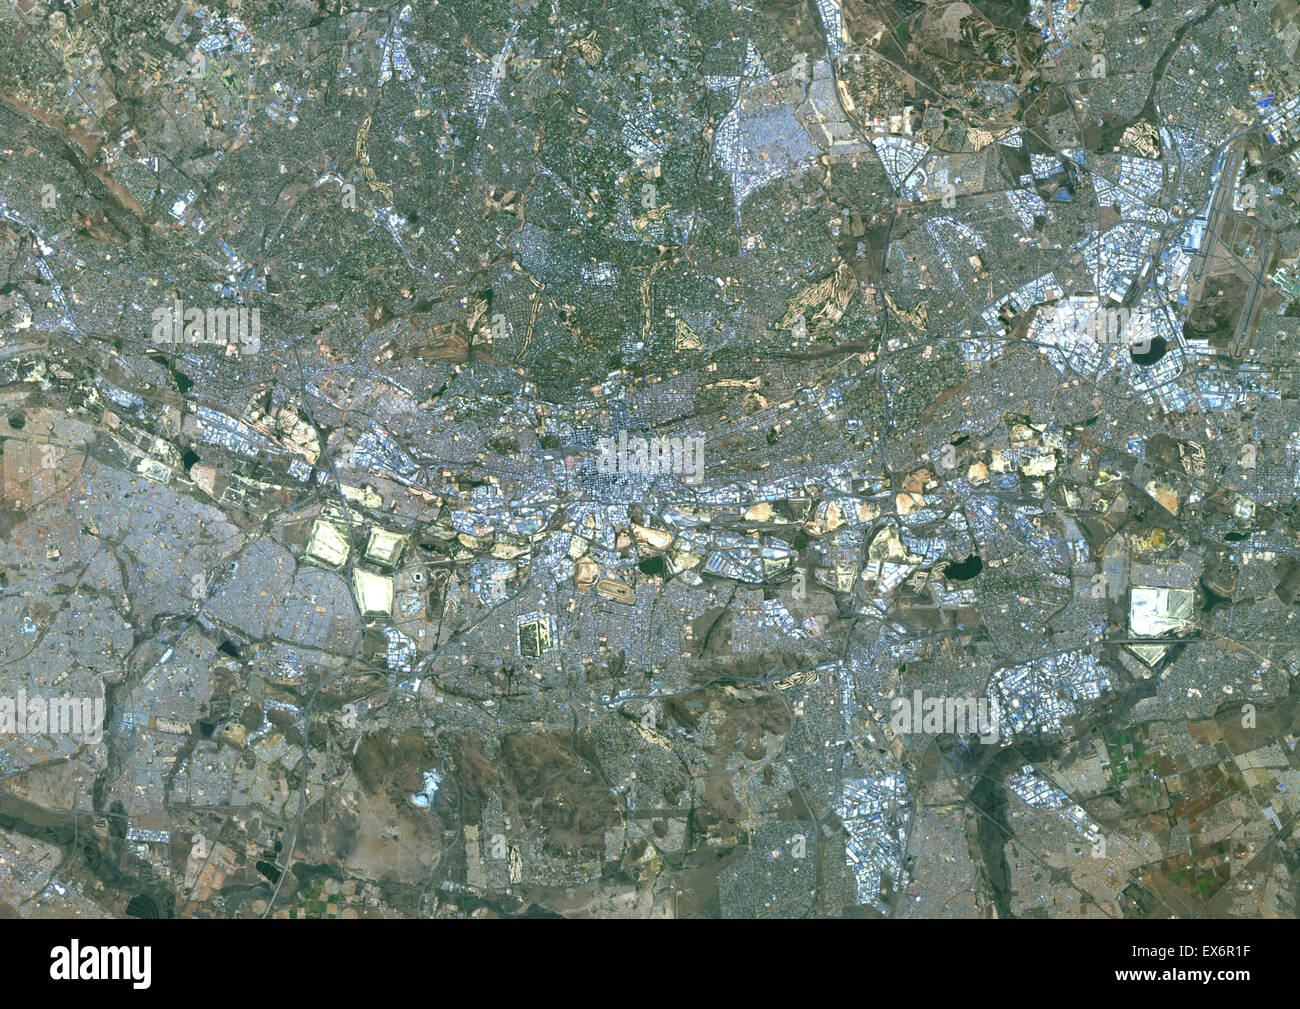 Colour satellite image of Johannesburg, South Africa. Image taken on August 28, 2014 with Landsat 8 data. Stock Photo